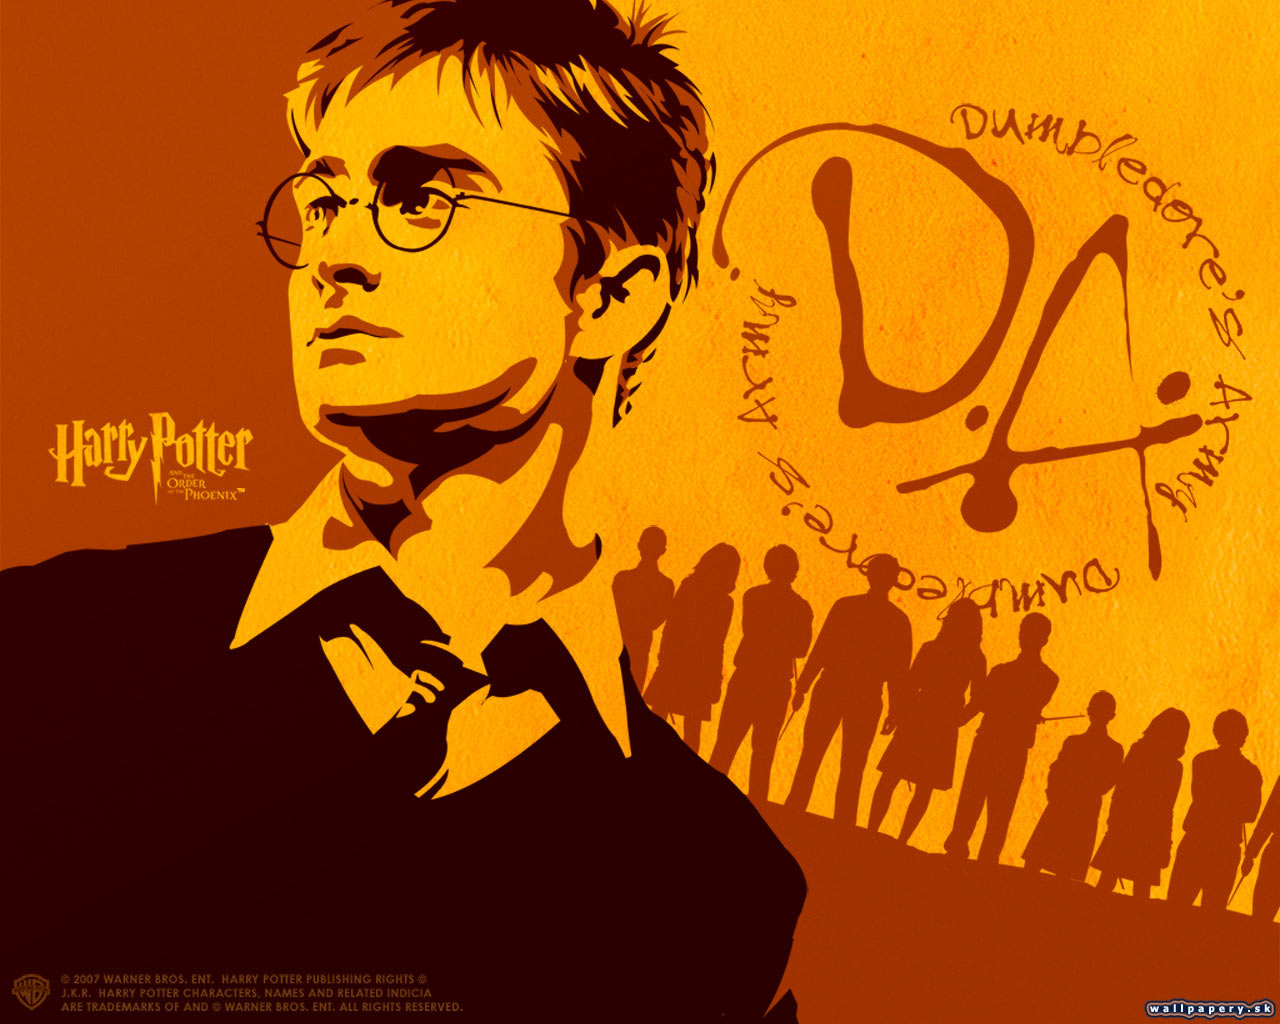 Harry Potter and the Order of the Phoenix - wallpaper 10